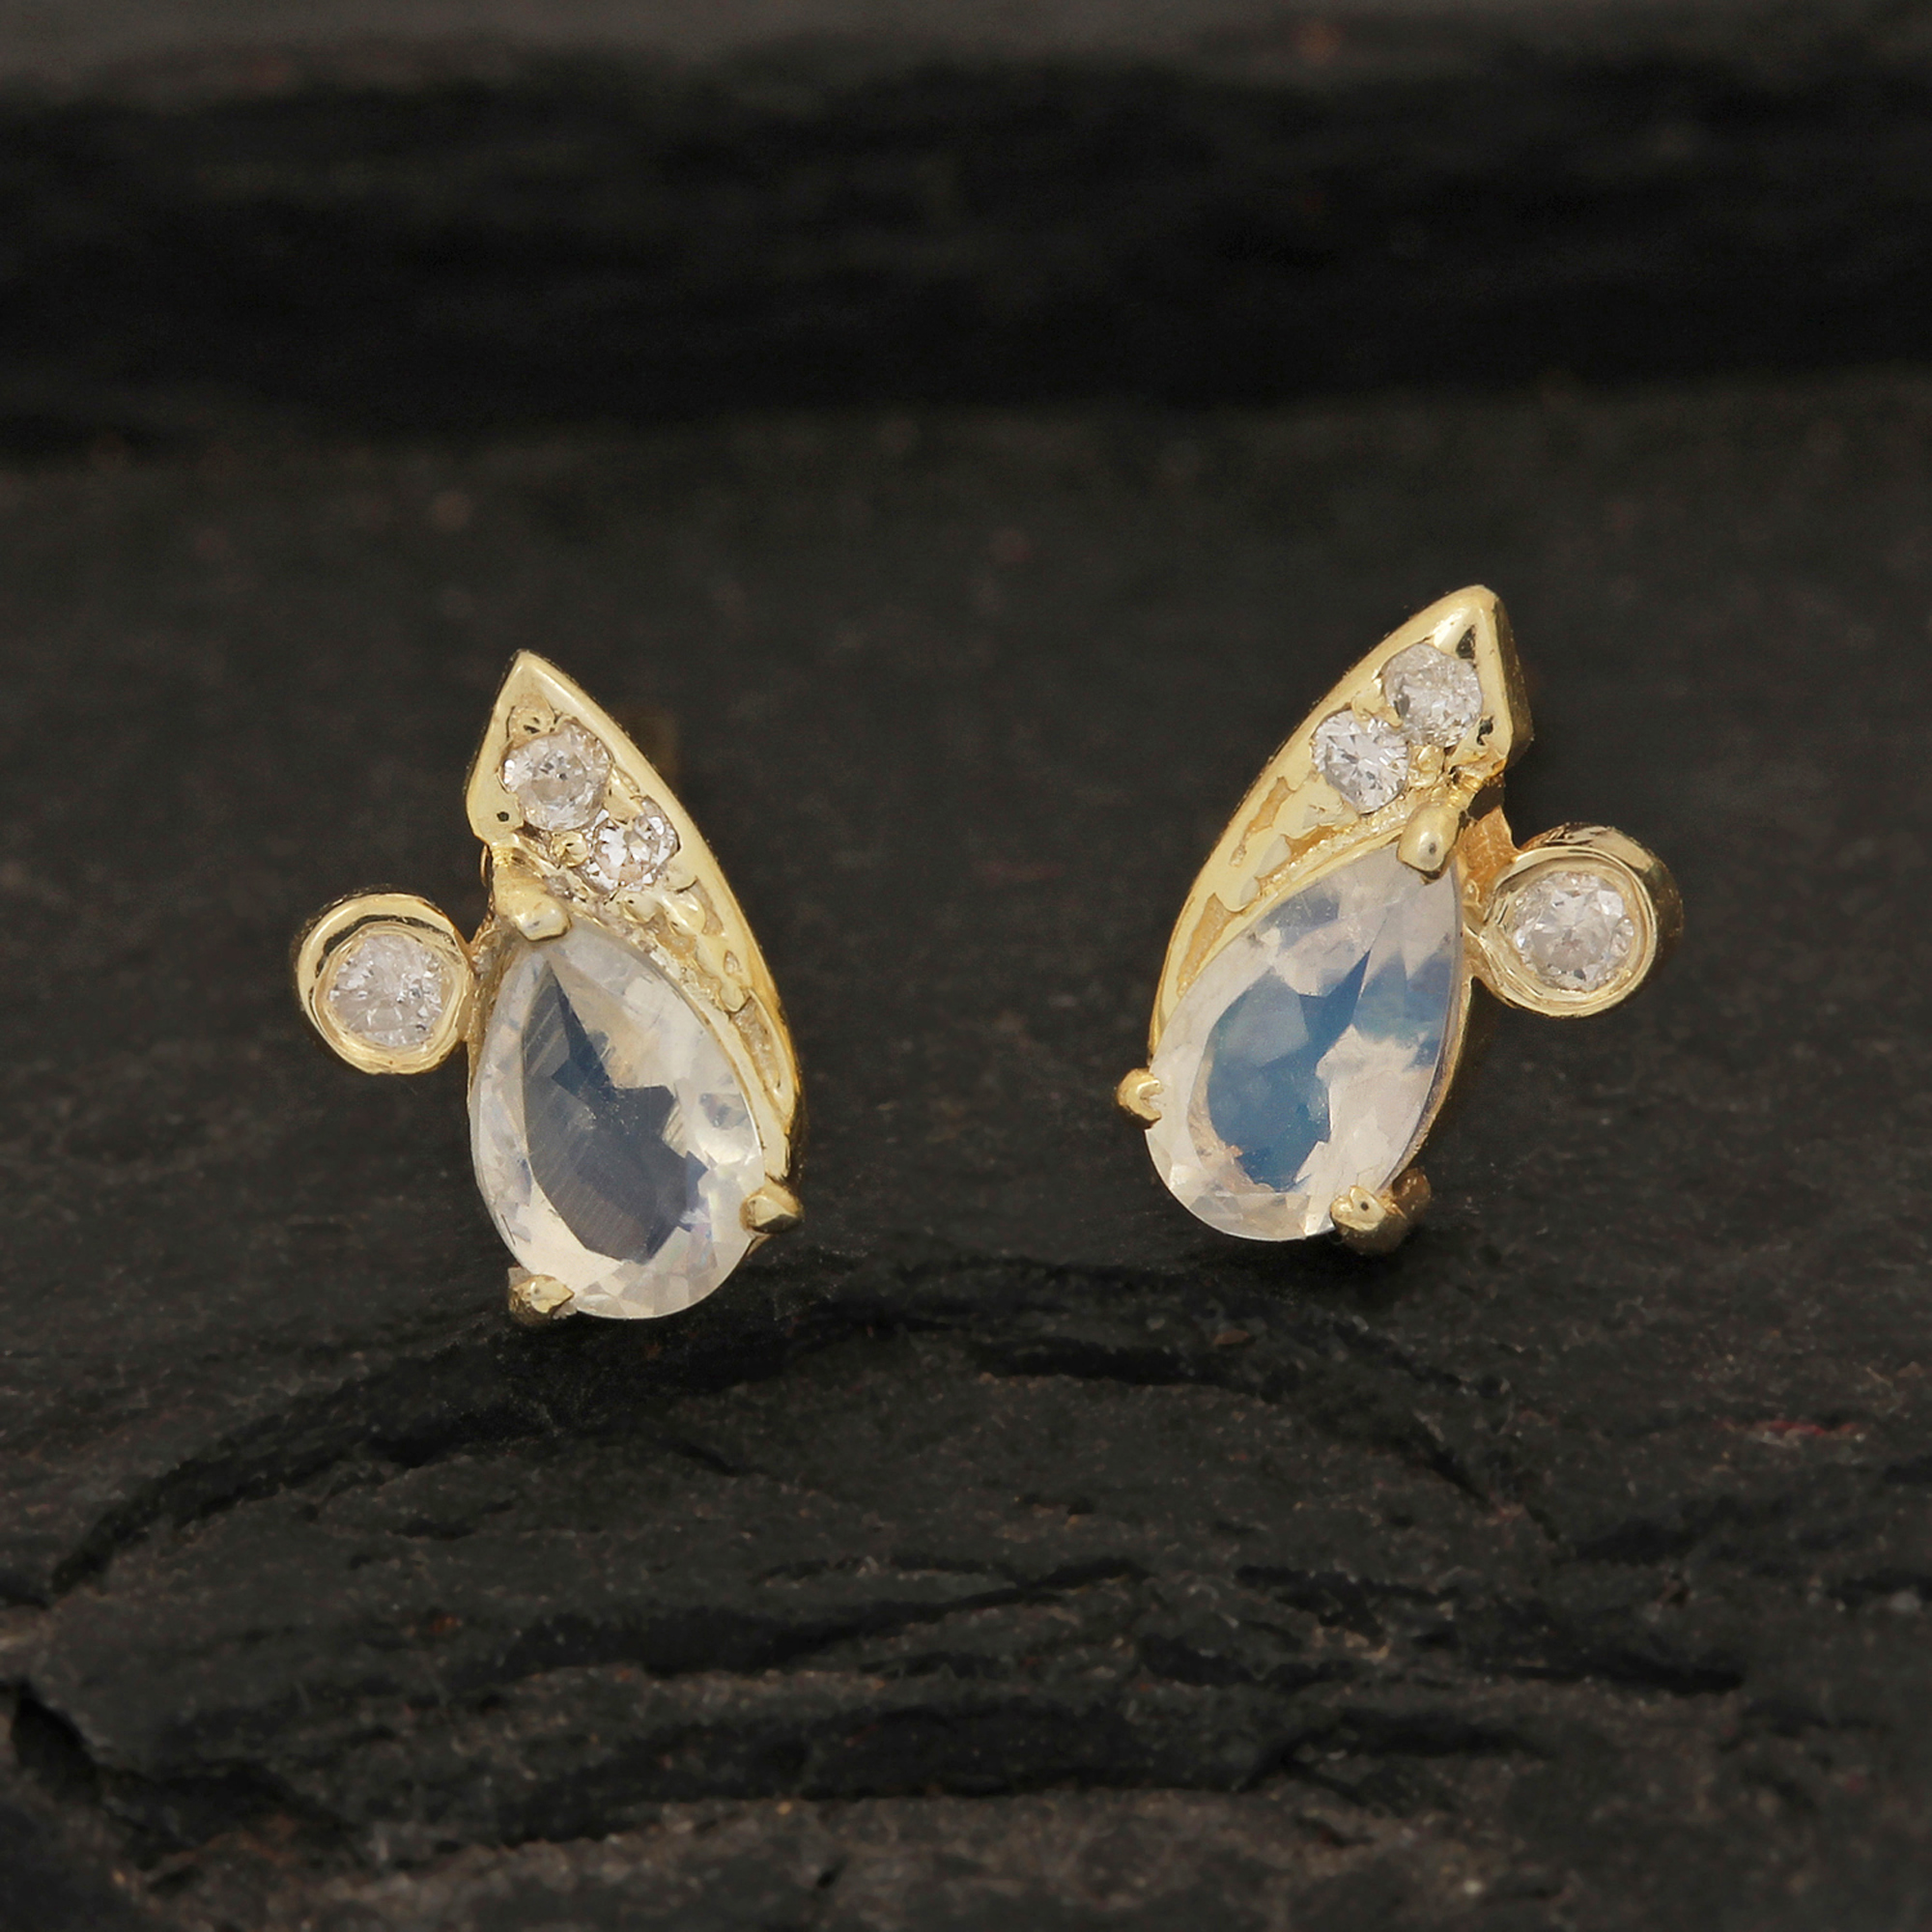 Solid 14k Gold Stud Earrings Adorned With Natural Diamond & Moonstone